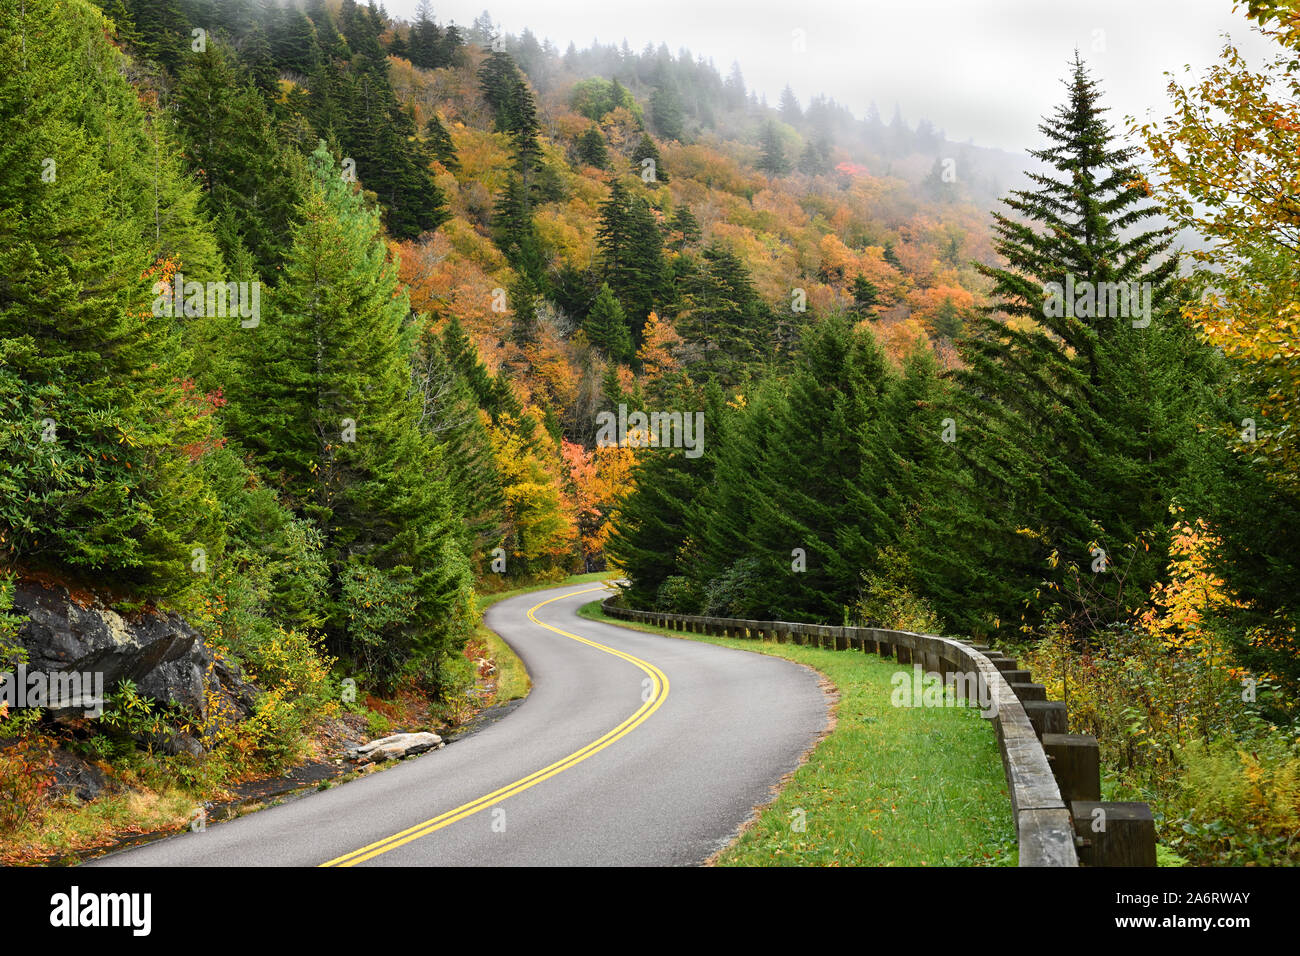 The autumn colors are inviting on Blue RIdge Parkway in October. The ancient, misty, Blue RIdge Mountains invite a peaceful feeling. Stock Photo